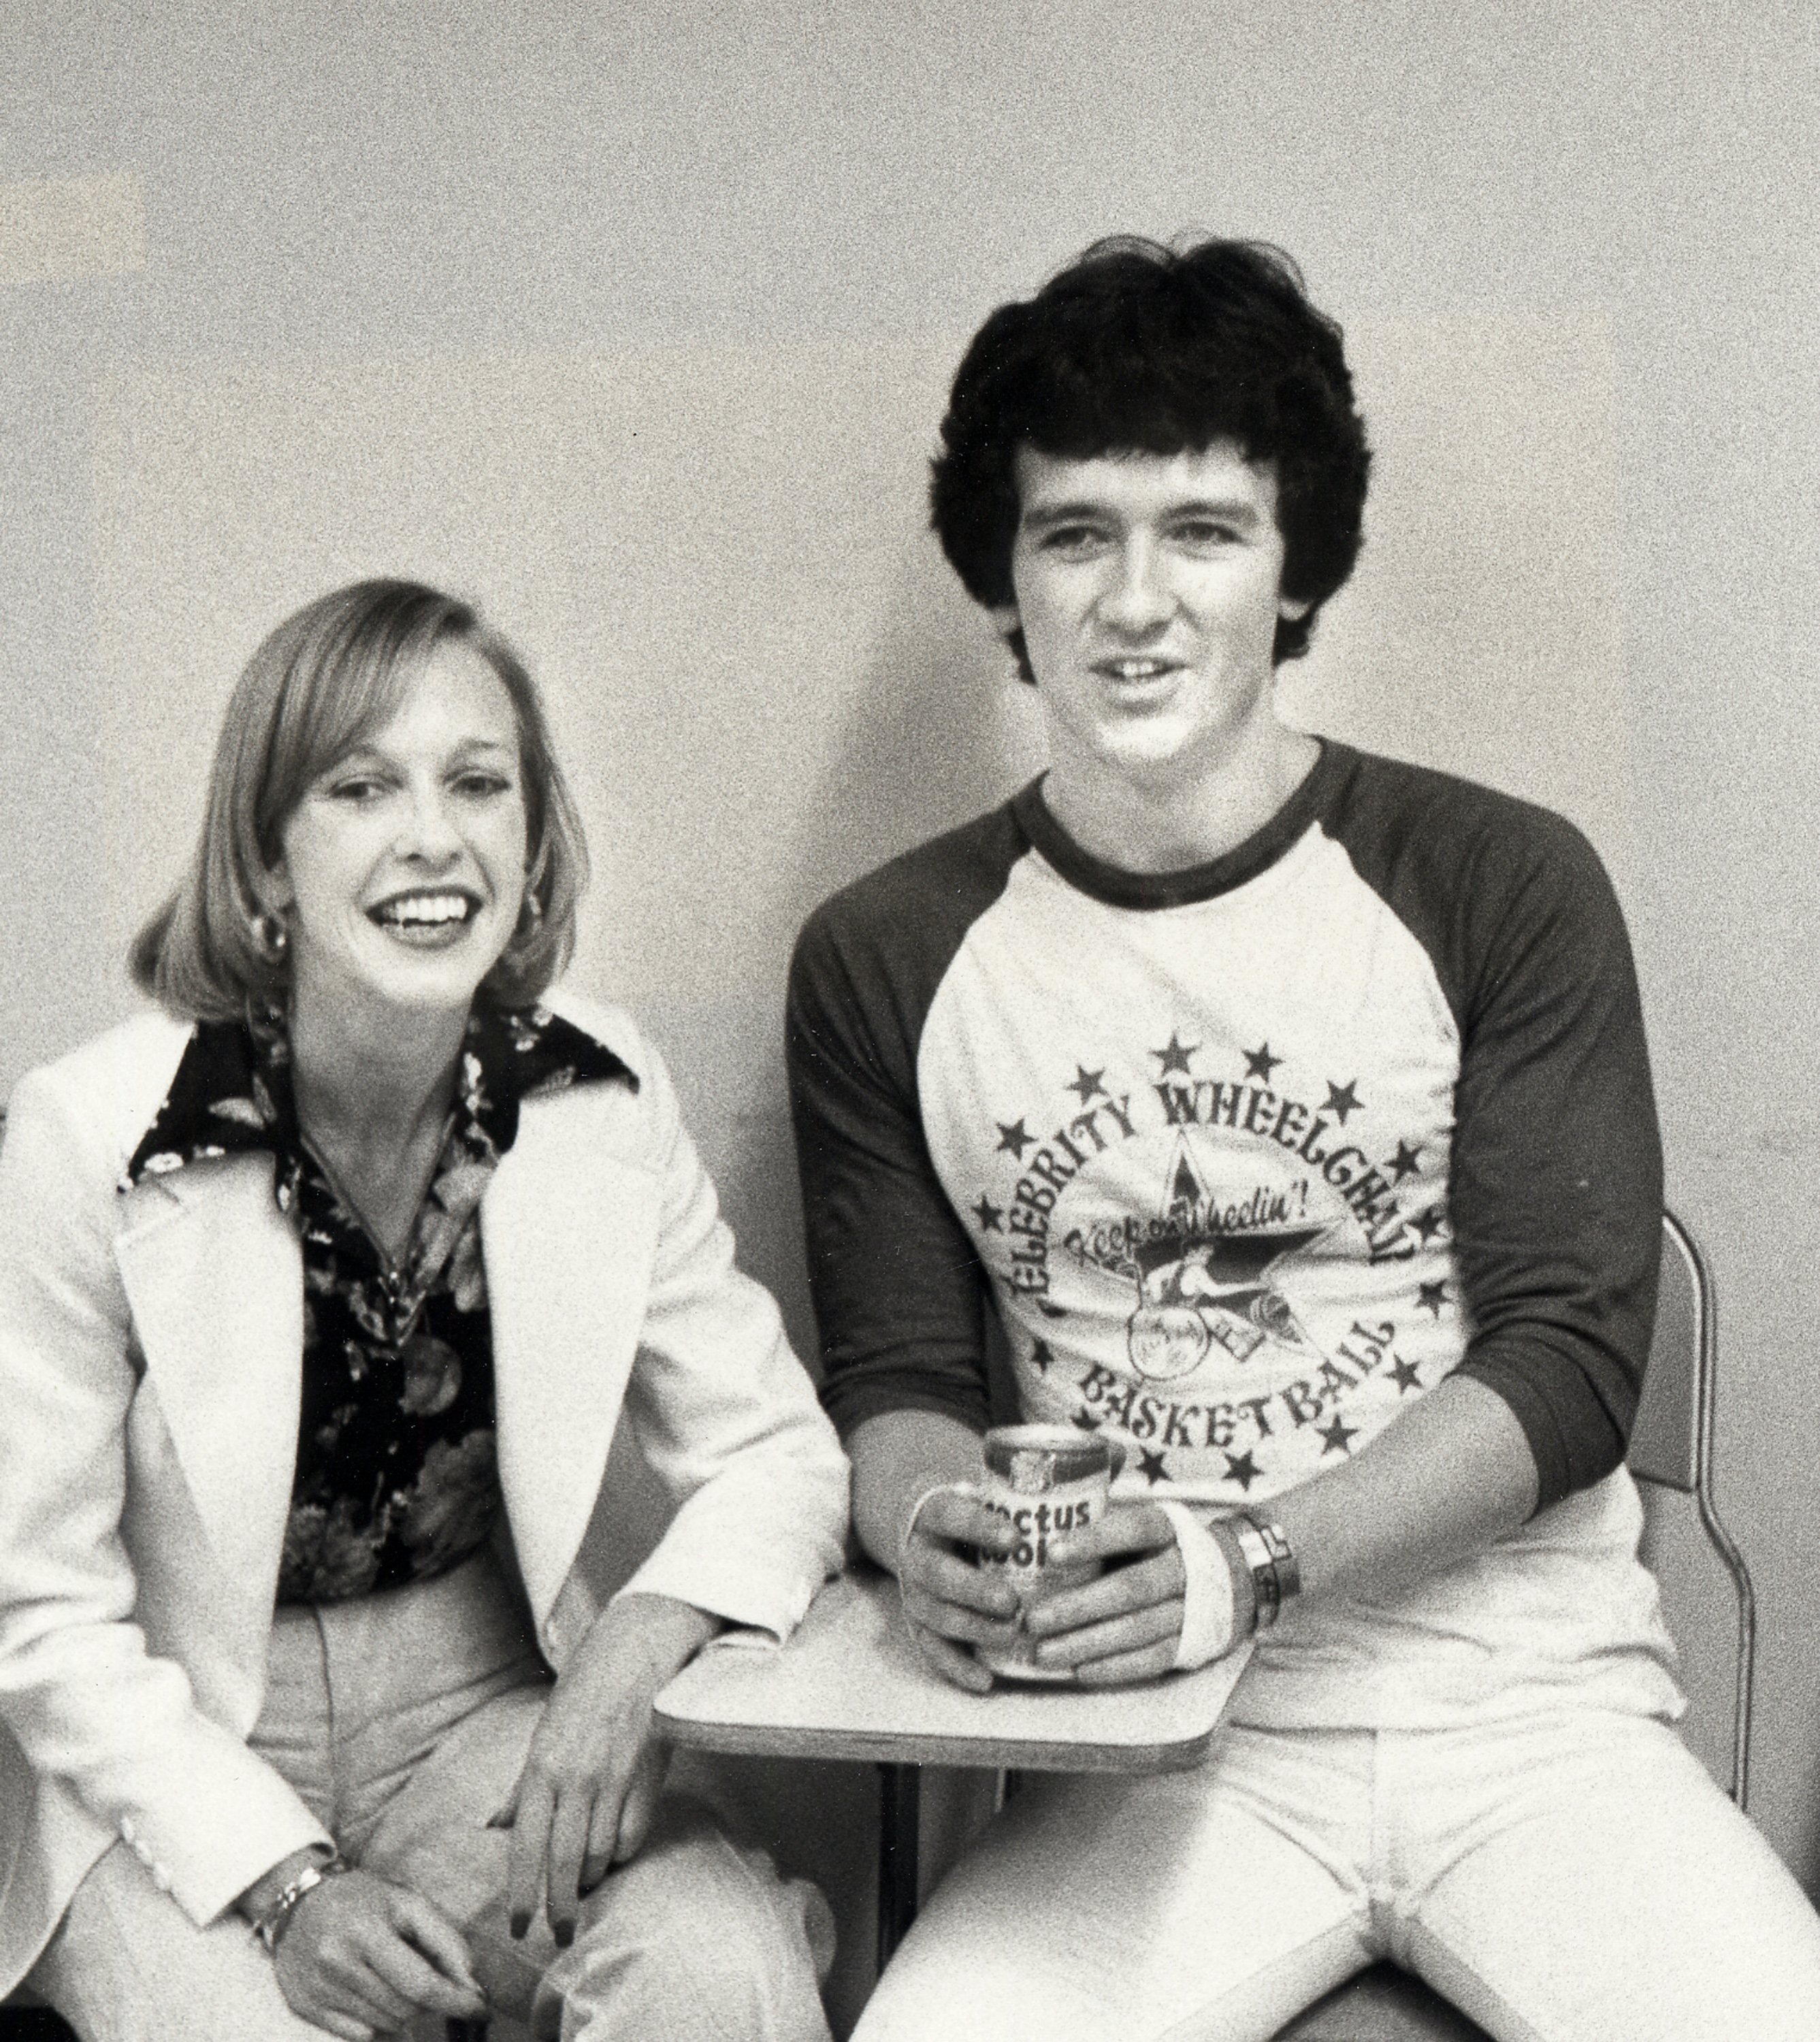 Patrick Duffy and wife Carlyn Rosser attend a basketball game at California State University on May 22, 1977 in Northridge. | Source: Getty Images